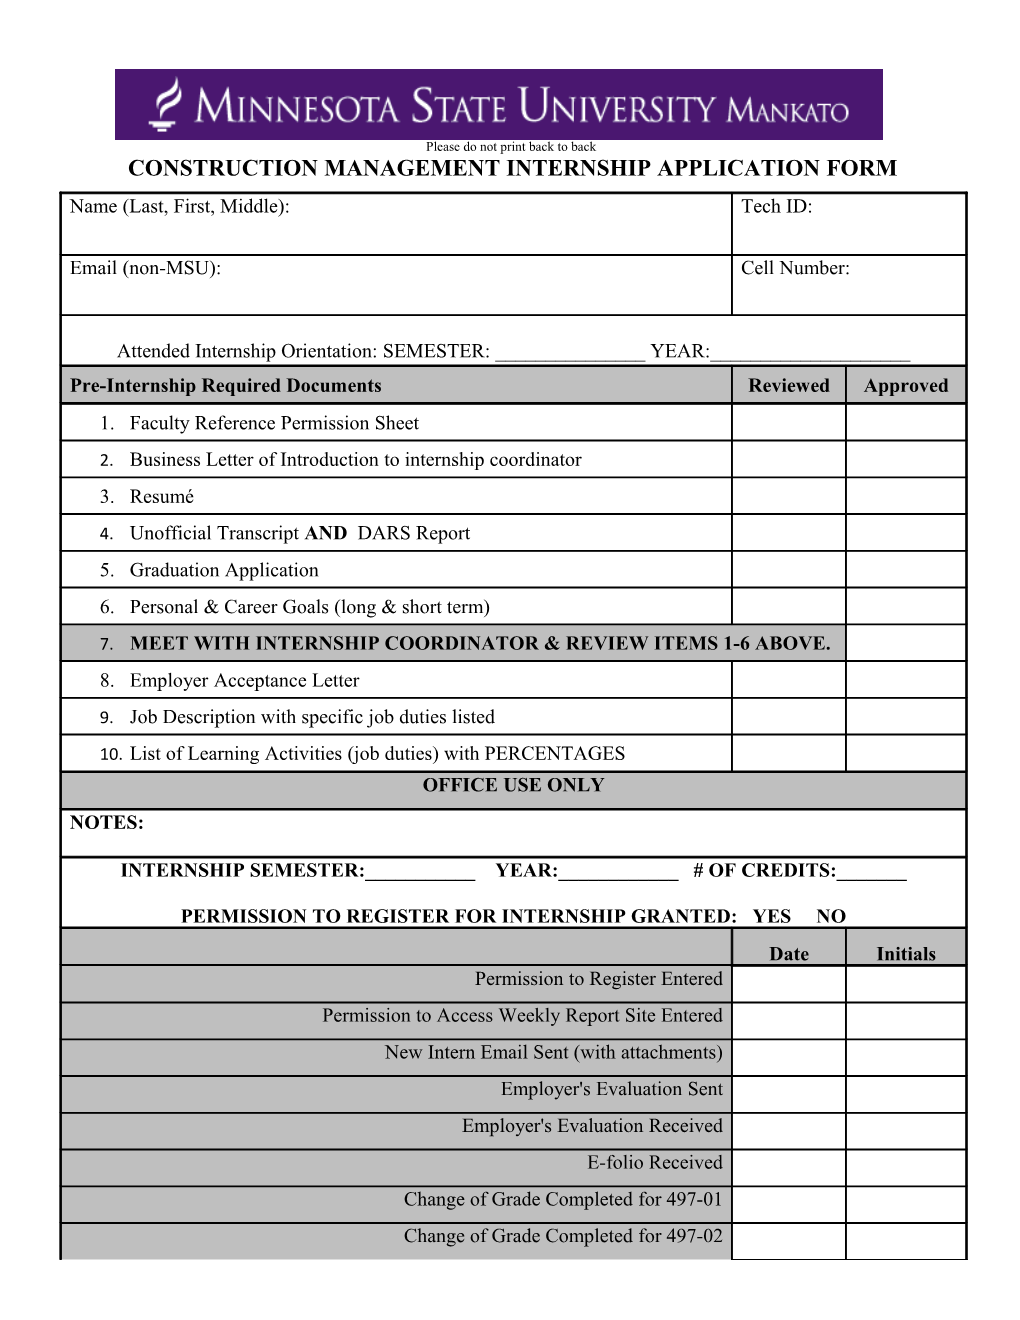 Faculty Reference Permission Sheet